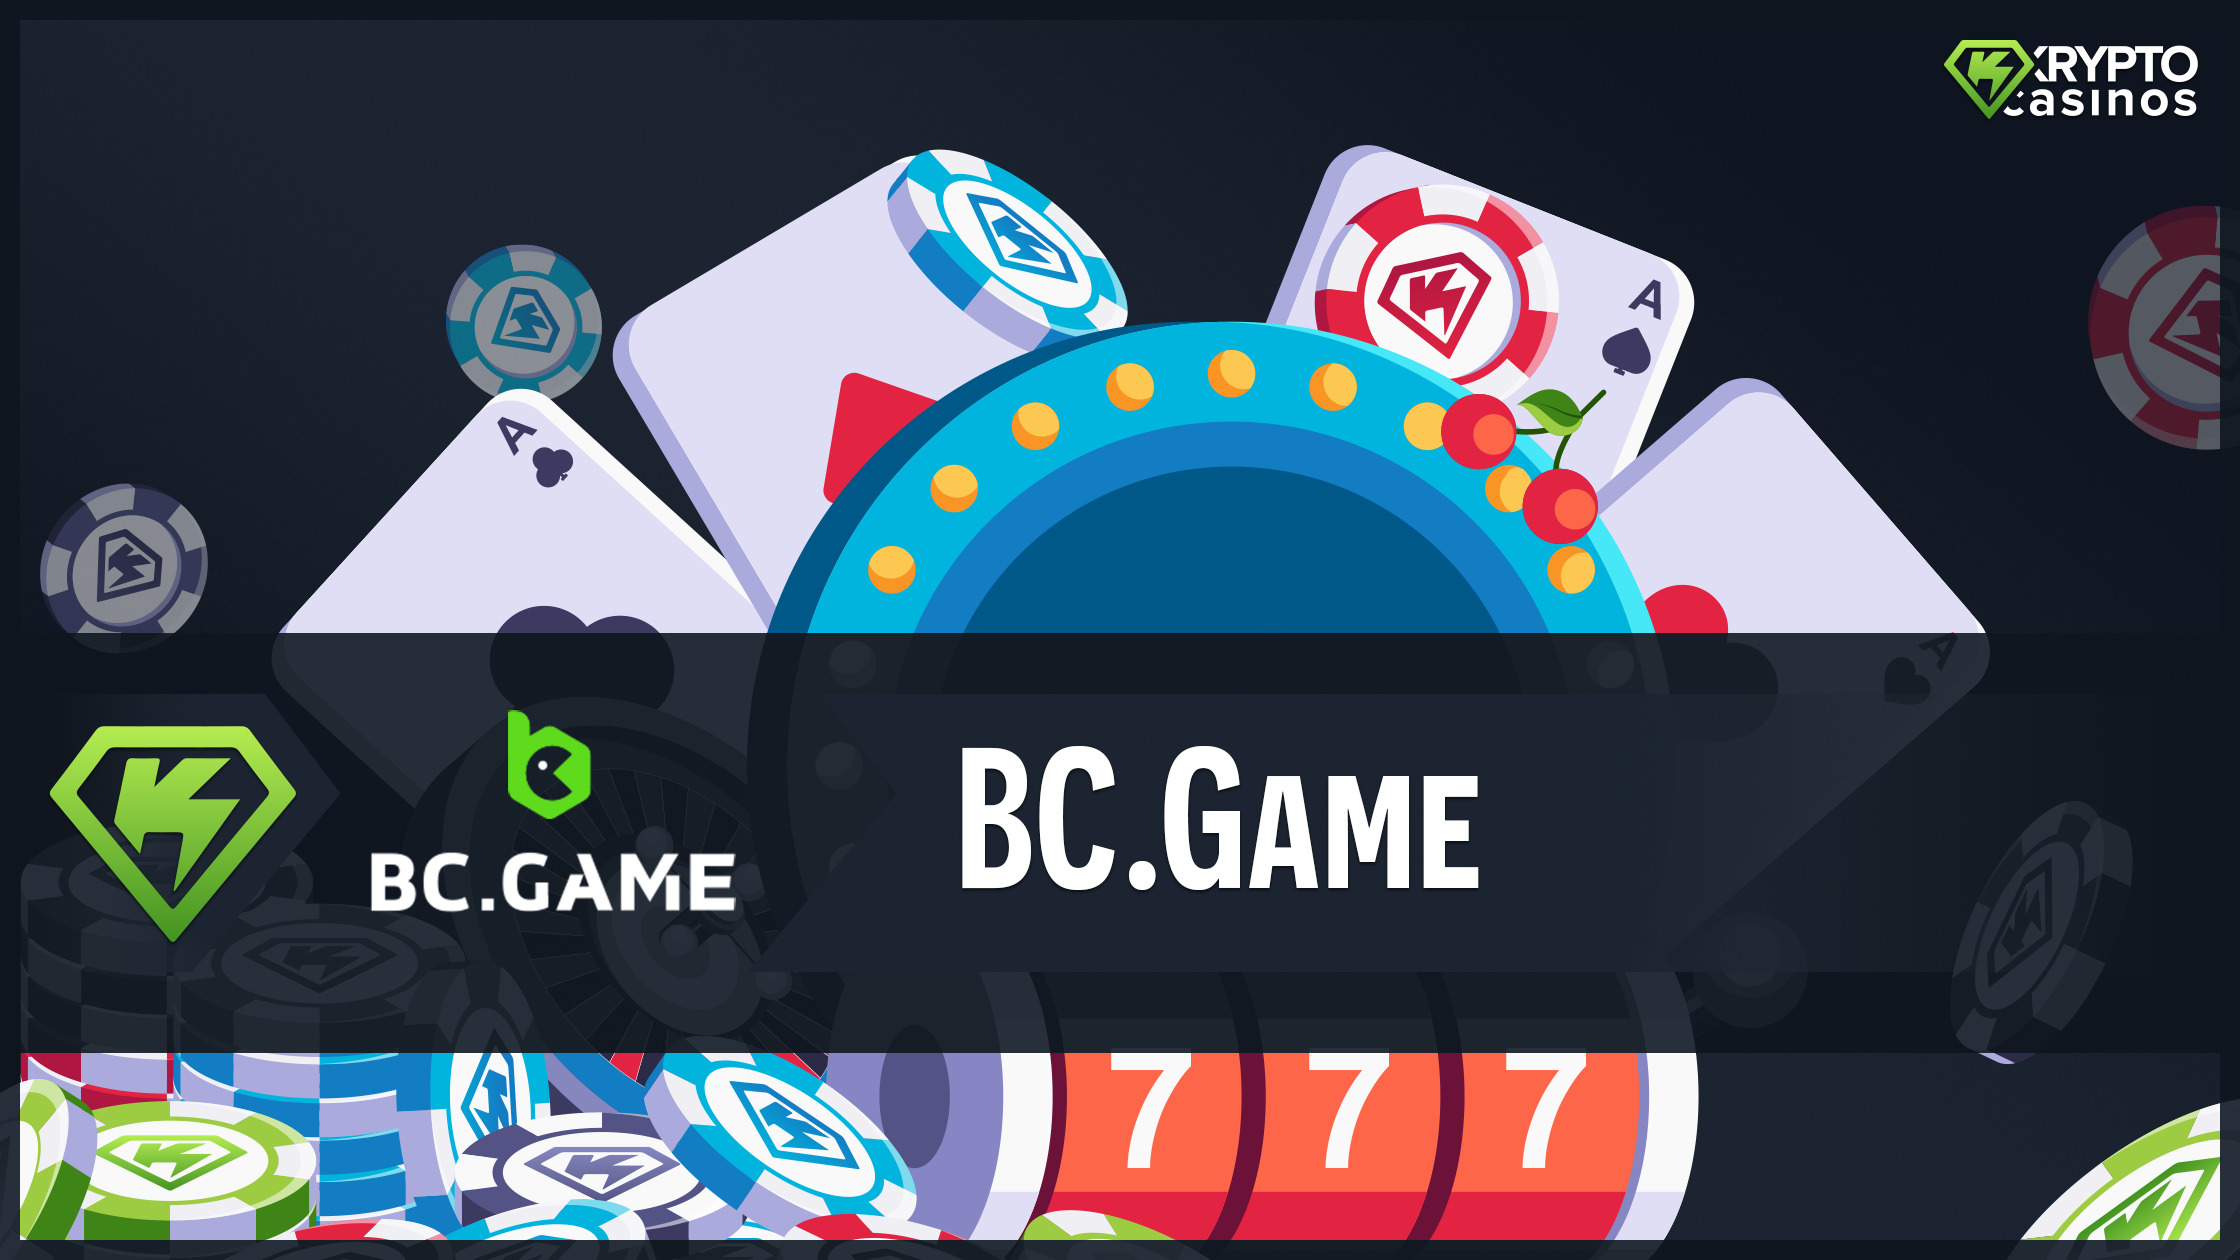 50 Best Tweets Of All Time About BC.Game Casino